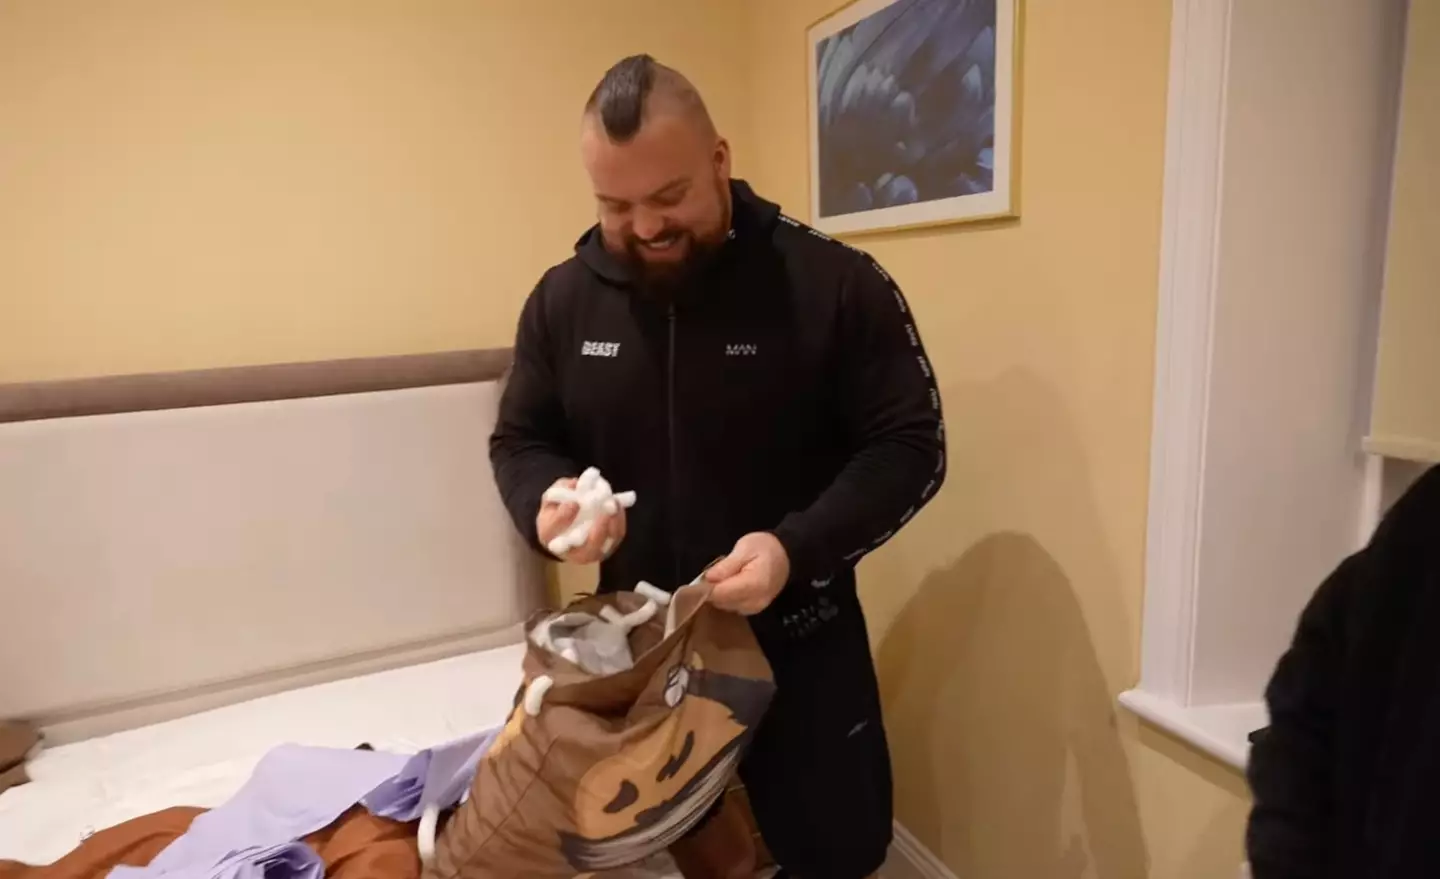 The former World's Strongest man found his pillows were filled with styrofoam and tissues.